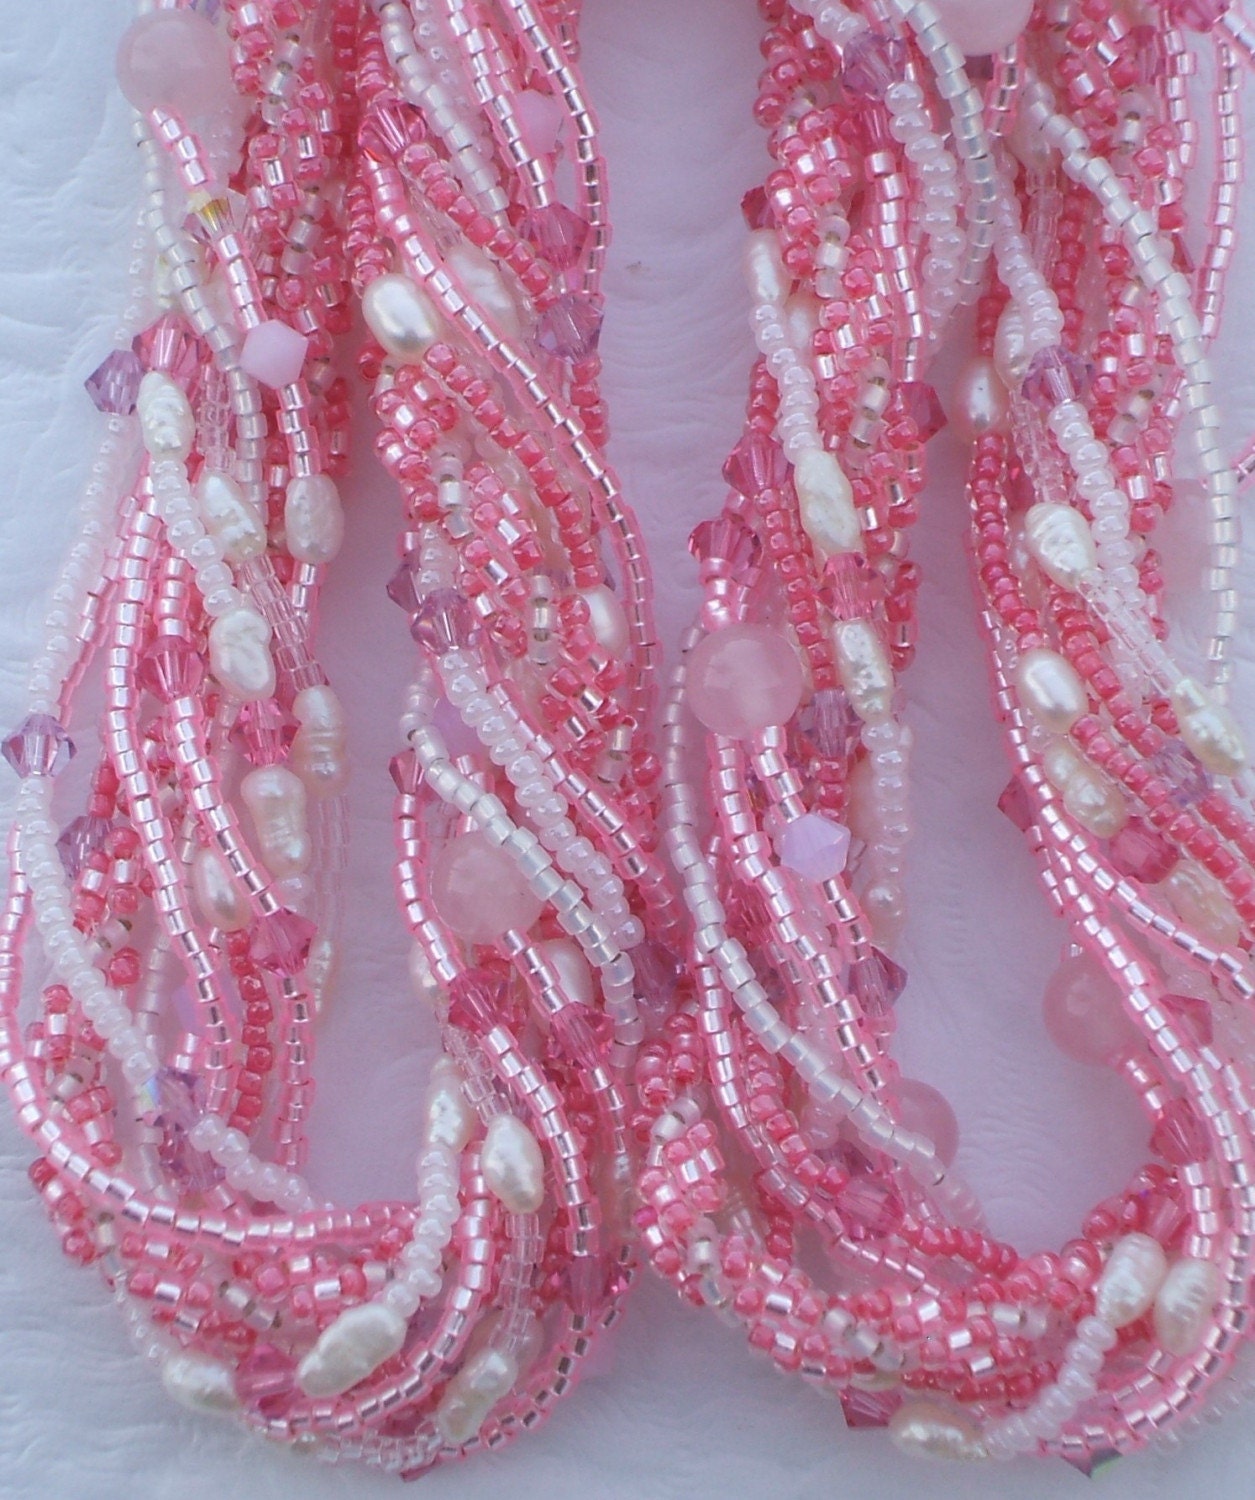 Betsy's Pink Silk Necklace with Swarovski Crystals, Pearls and a Spiral Rope